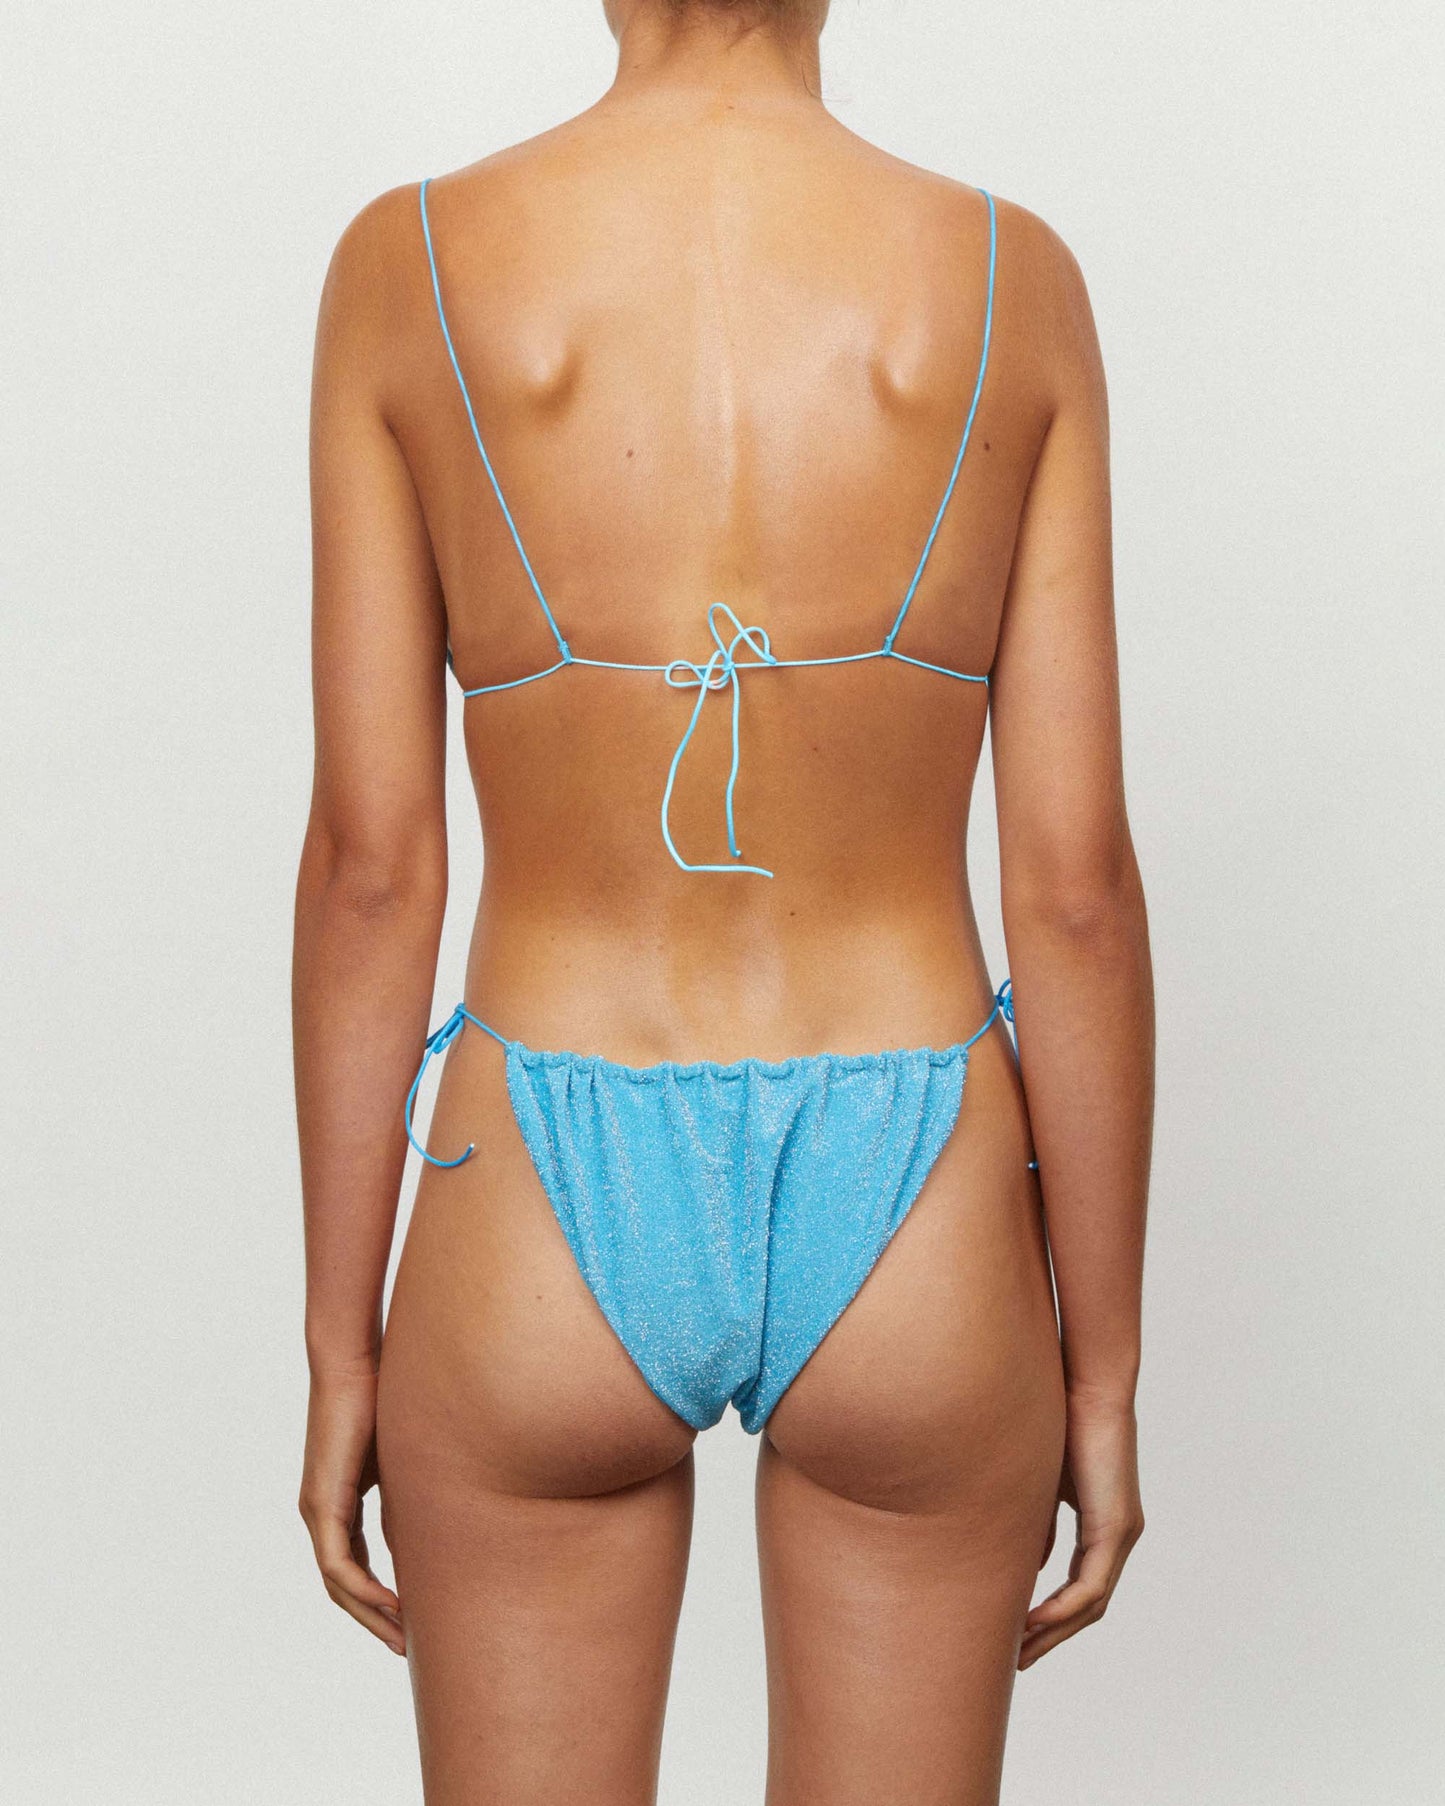 It's Now Cool Maillot de bain - String Top - Turquoise Lurex